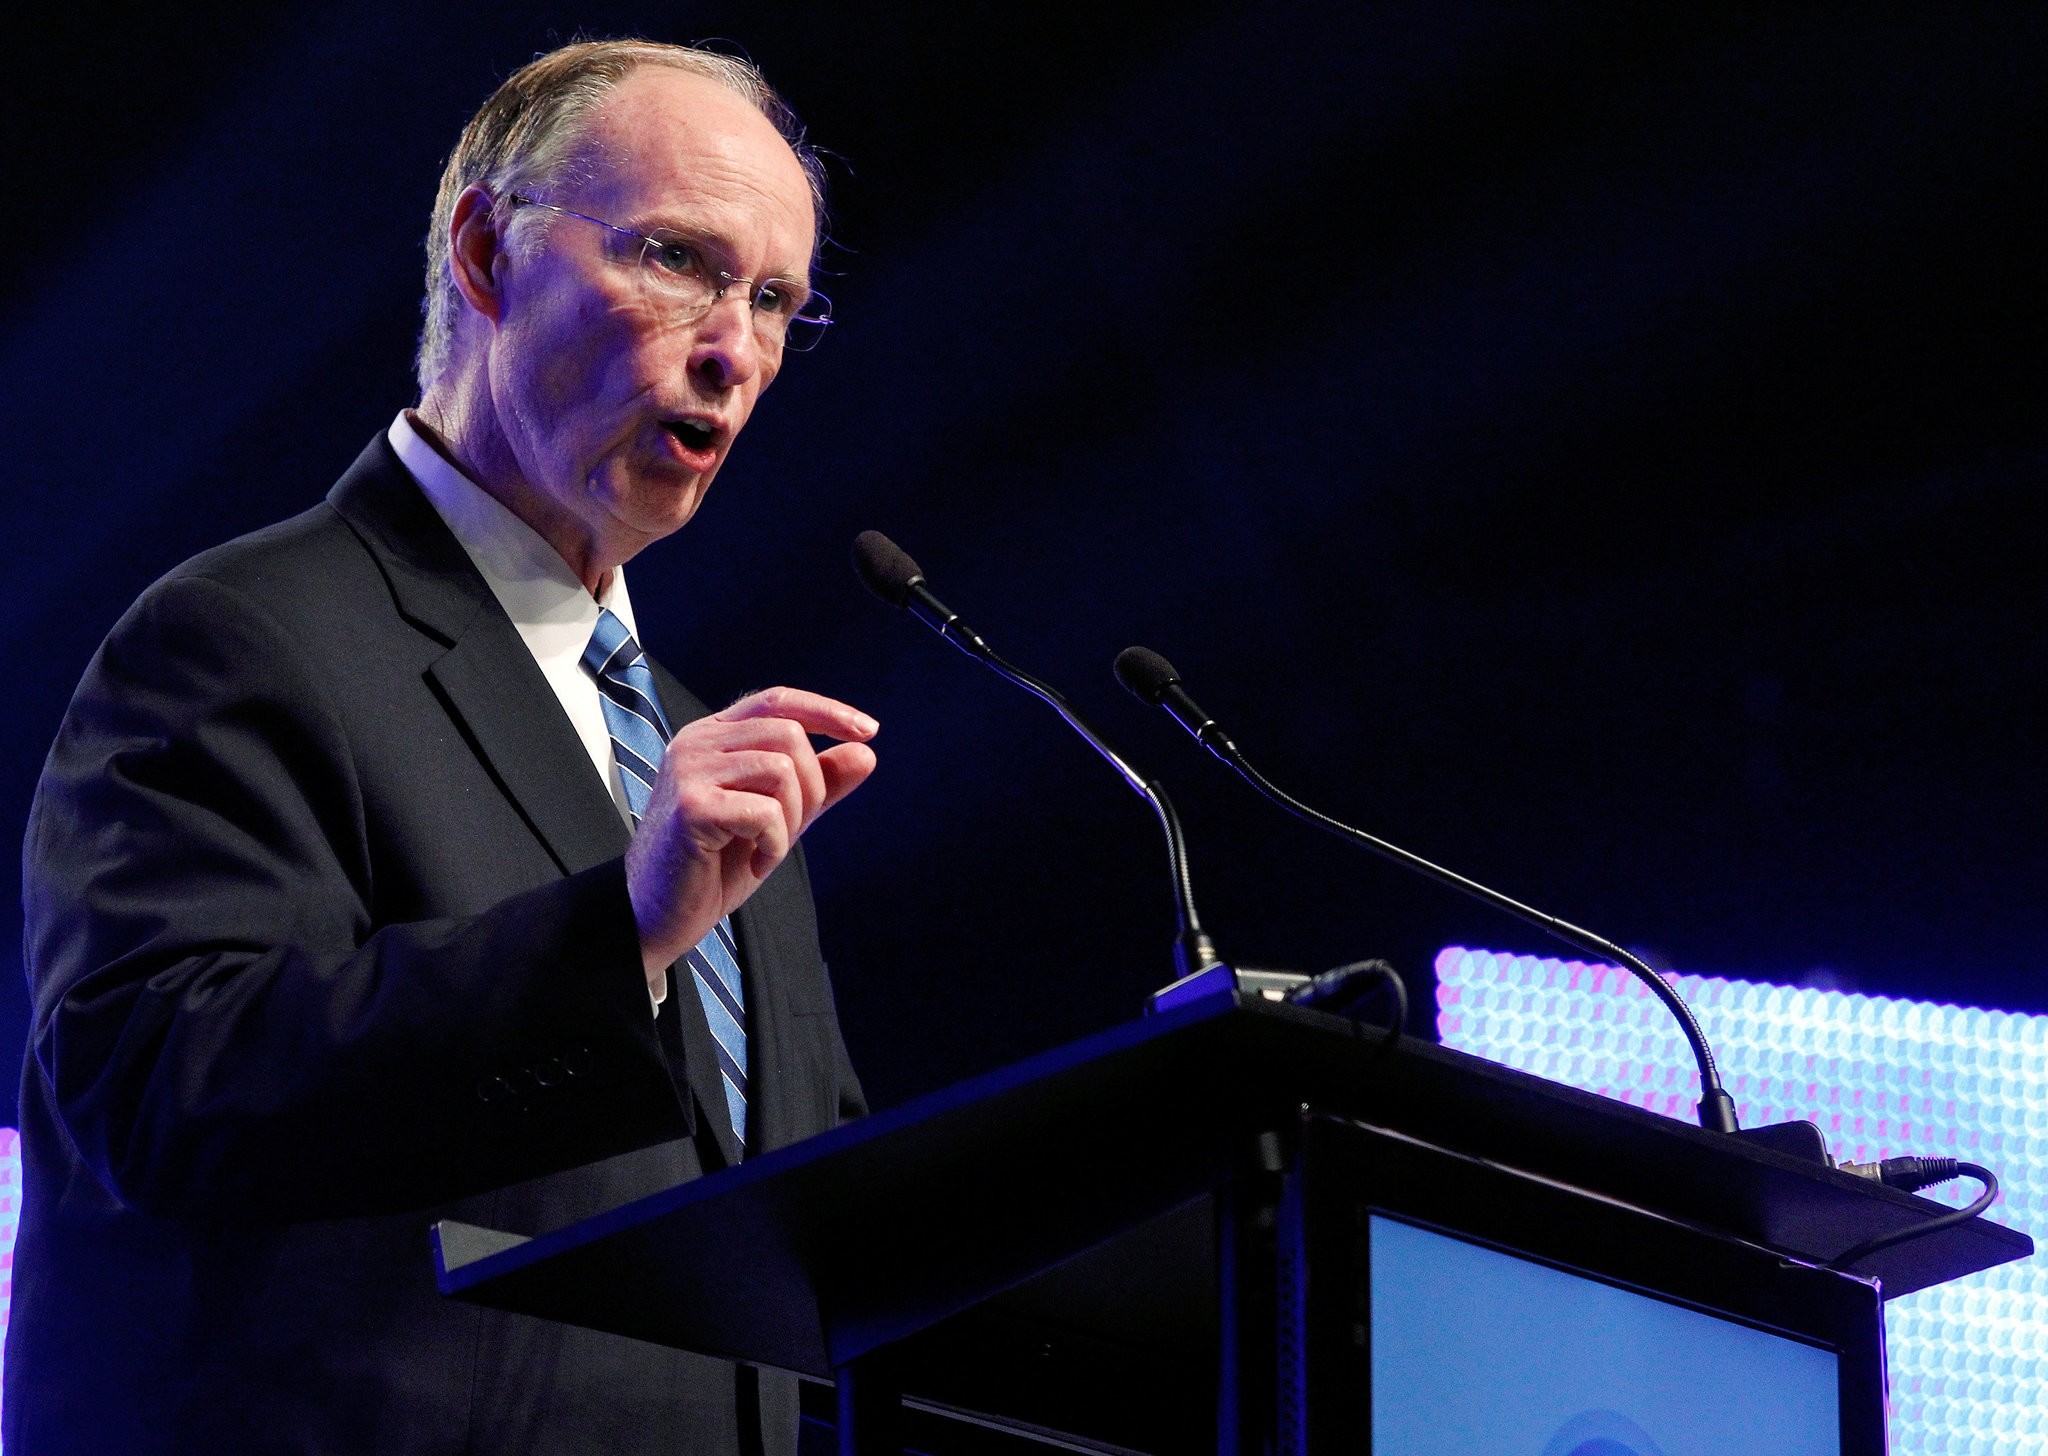 Alabama Governor Robert Bentley speaks during a news conference in Mobile, Alabama, U.S. on July 2, 2012. (REUTERS Photo)